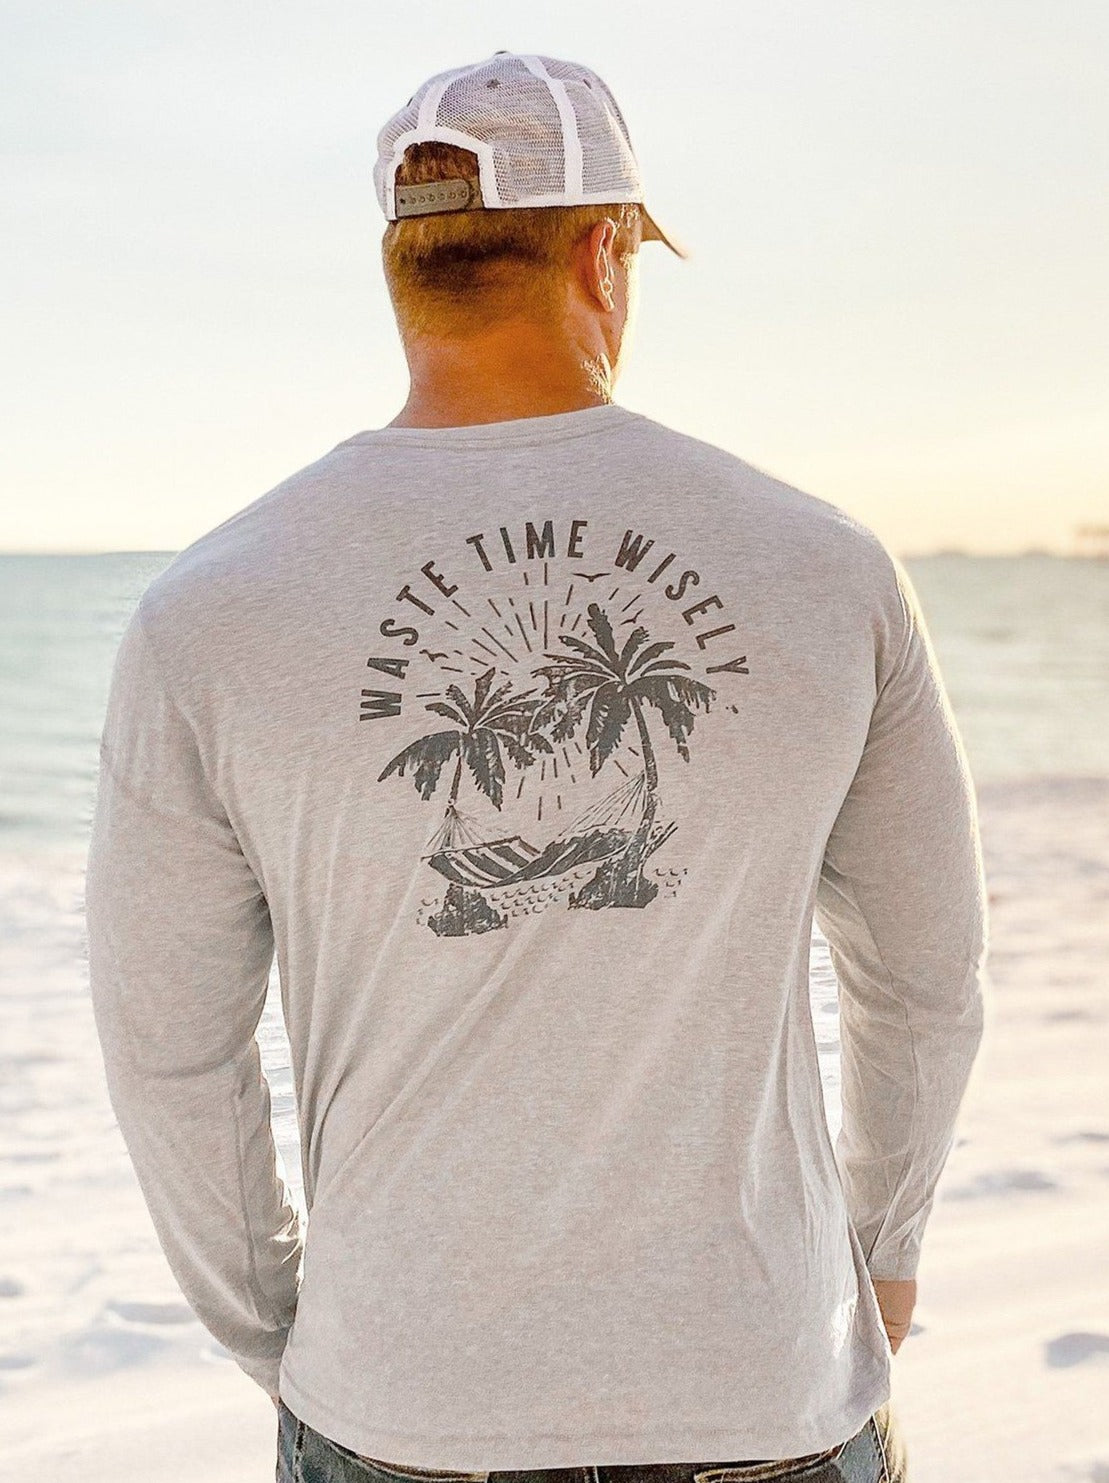 Waste Time Wisely Long Sleeve T-Shirt